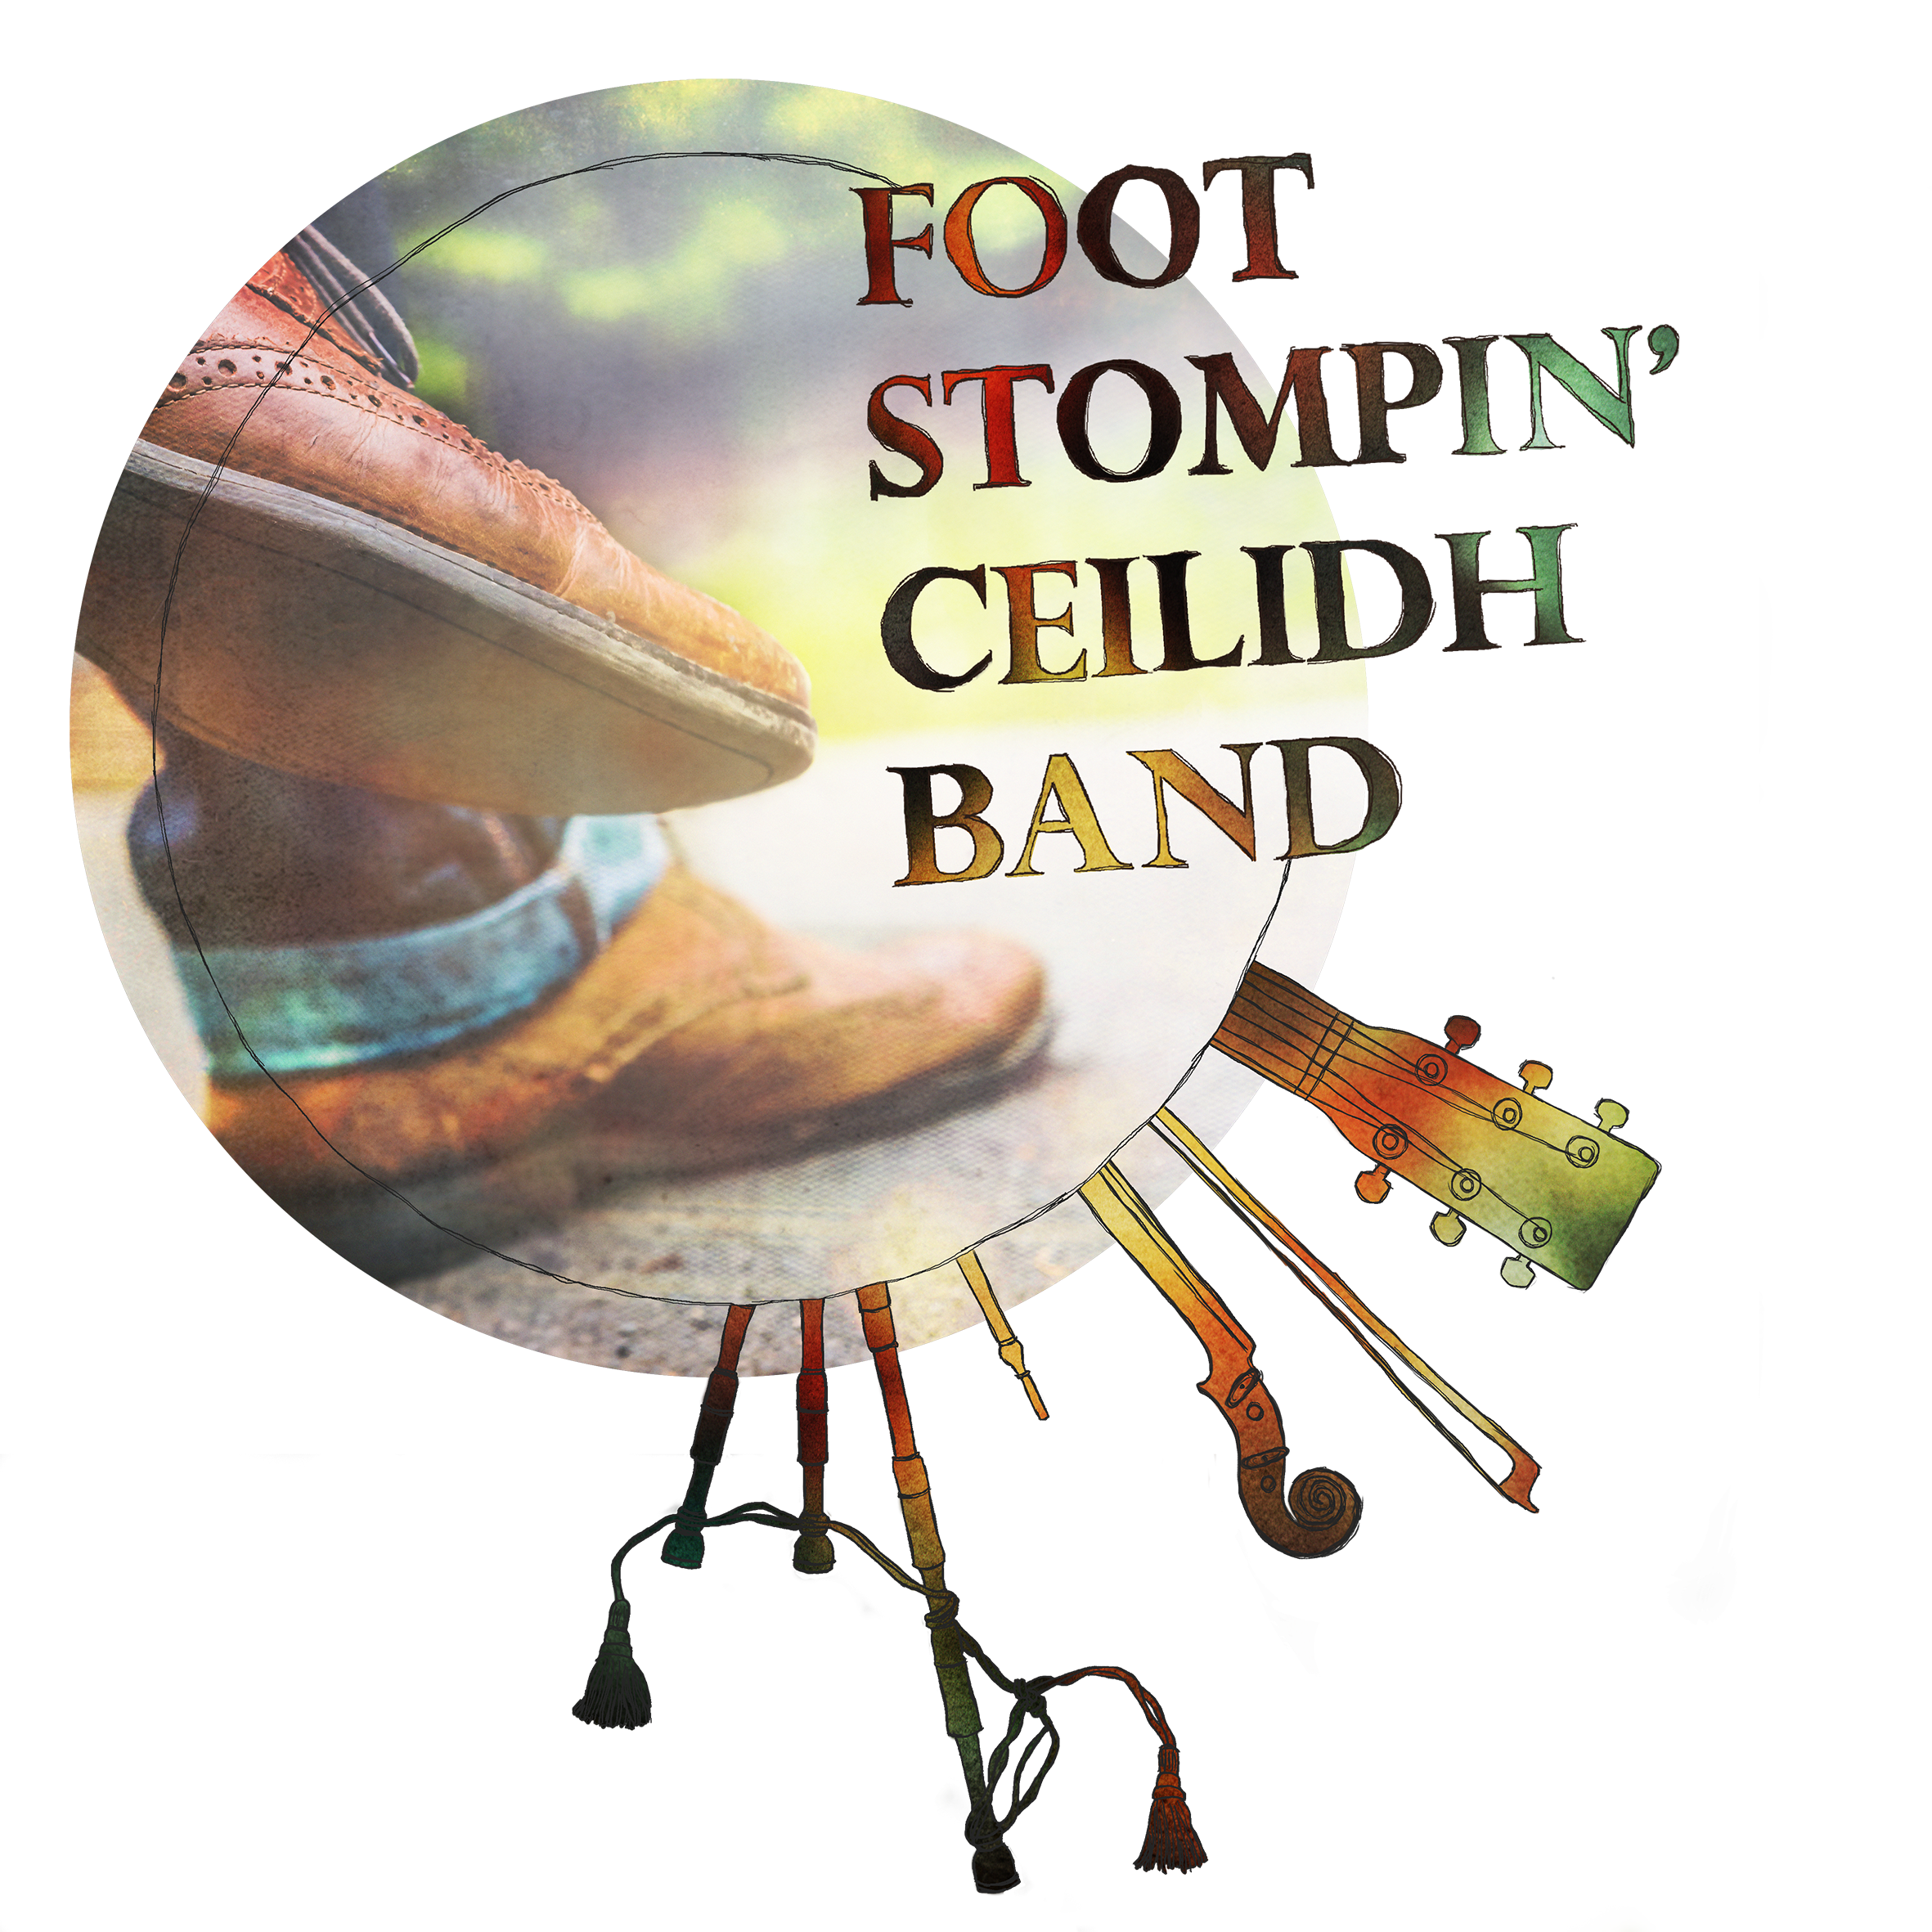 Foot Stompin' Ceilidh Band